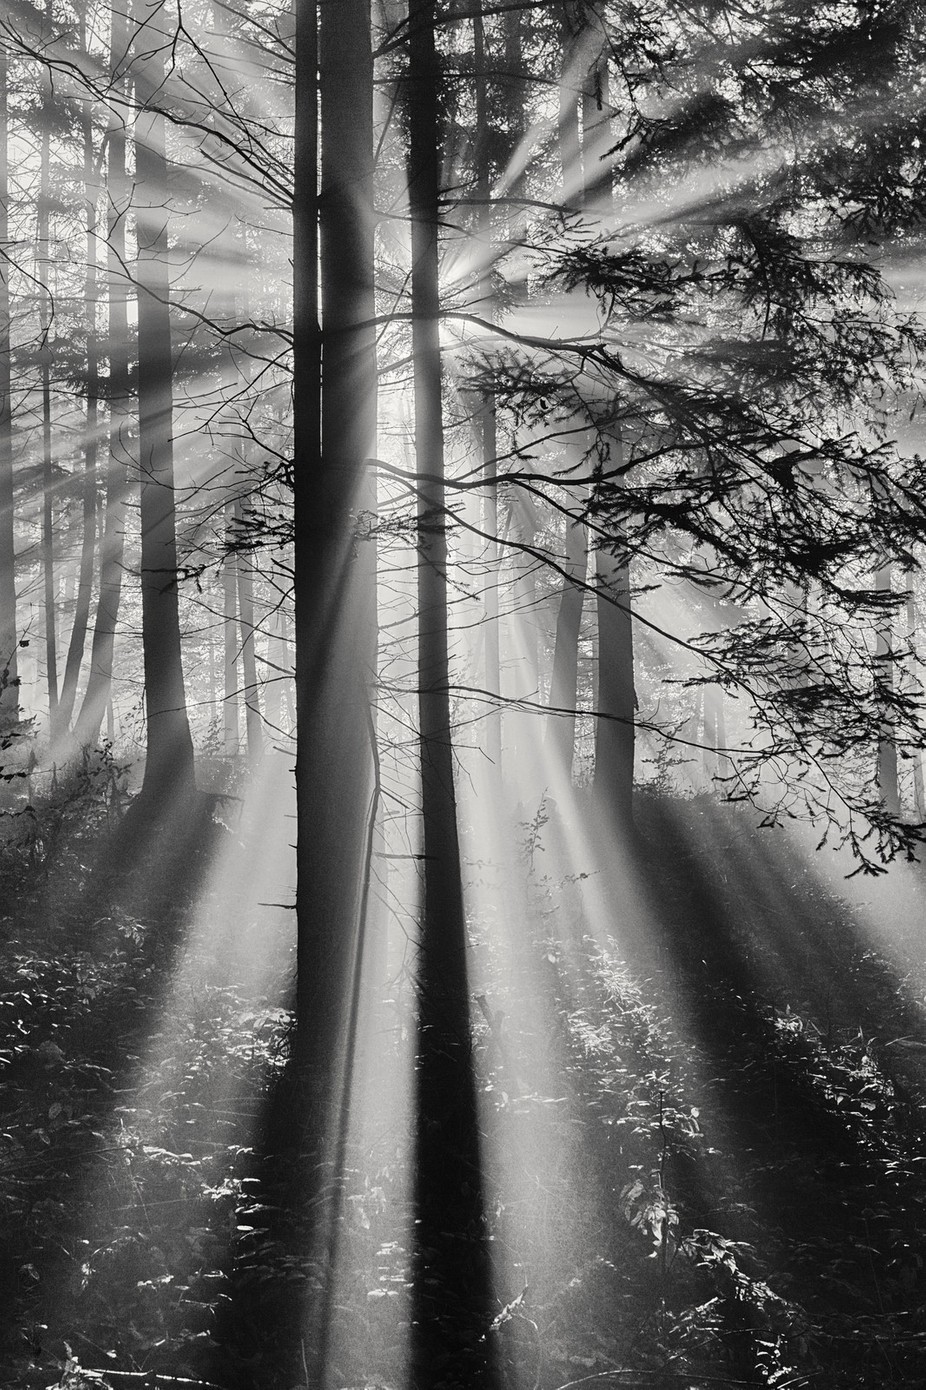 Sunshine Forest by HenrikSpranz - The Light Through The Trees Photo Contest